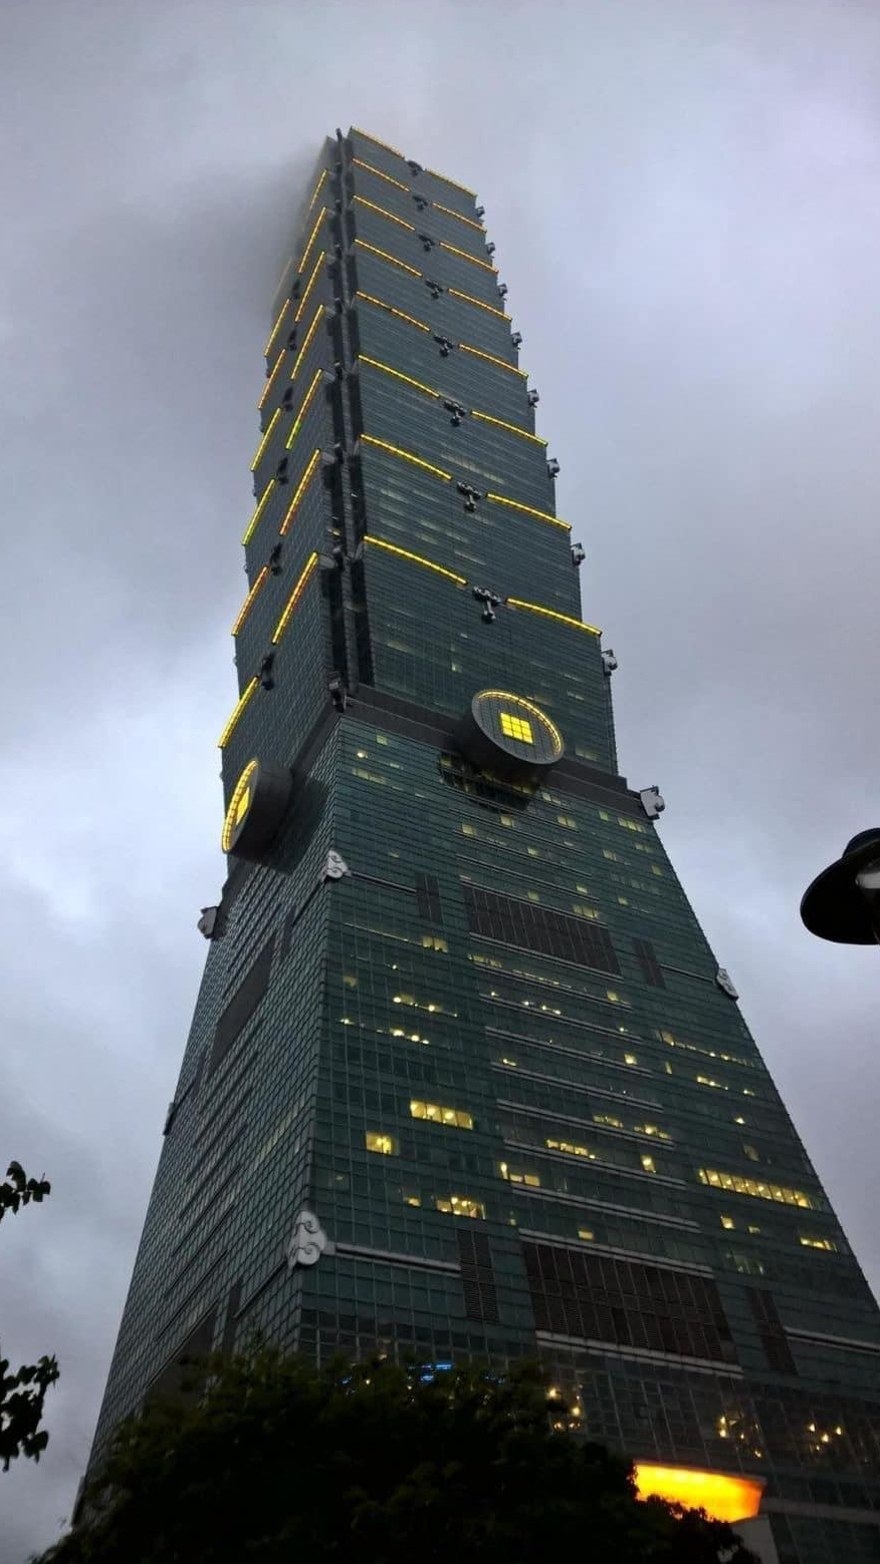 A very tall glass, city tower building that is dark, with only slivers of yellow lights